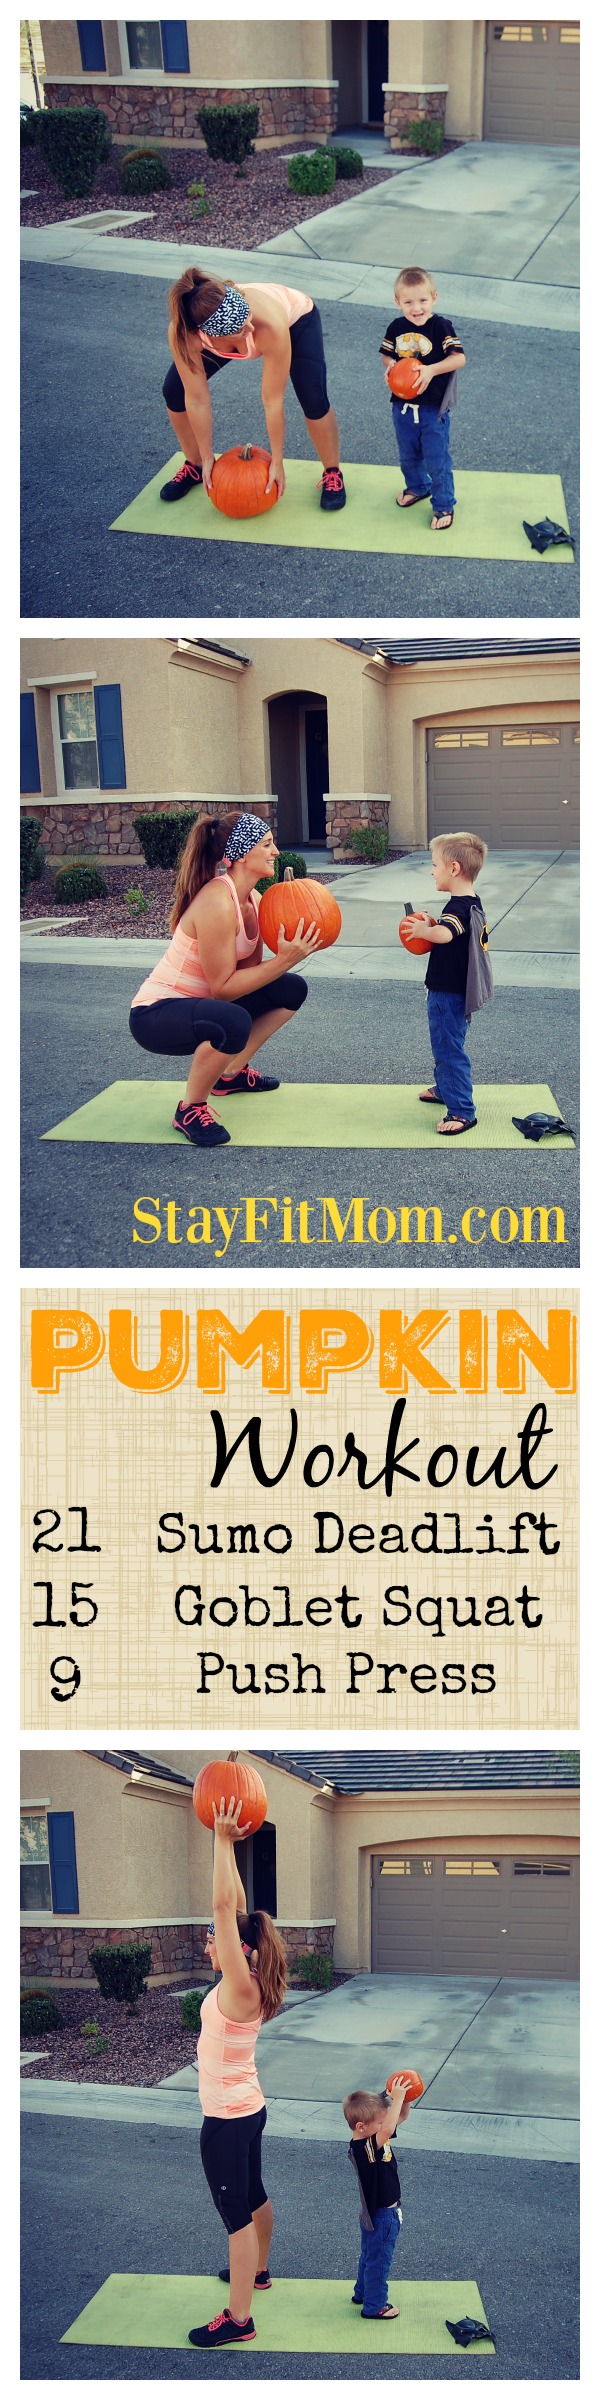 The perfect way to add weight to your workout this fall season! Love this pumpkin workout from StayFitMom.com!